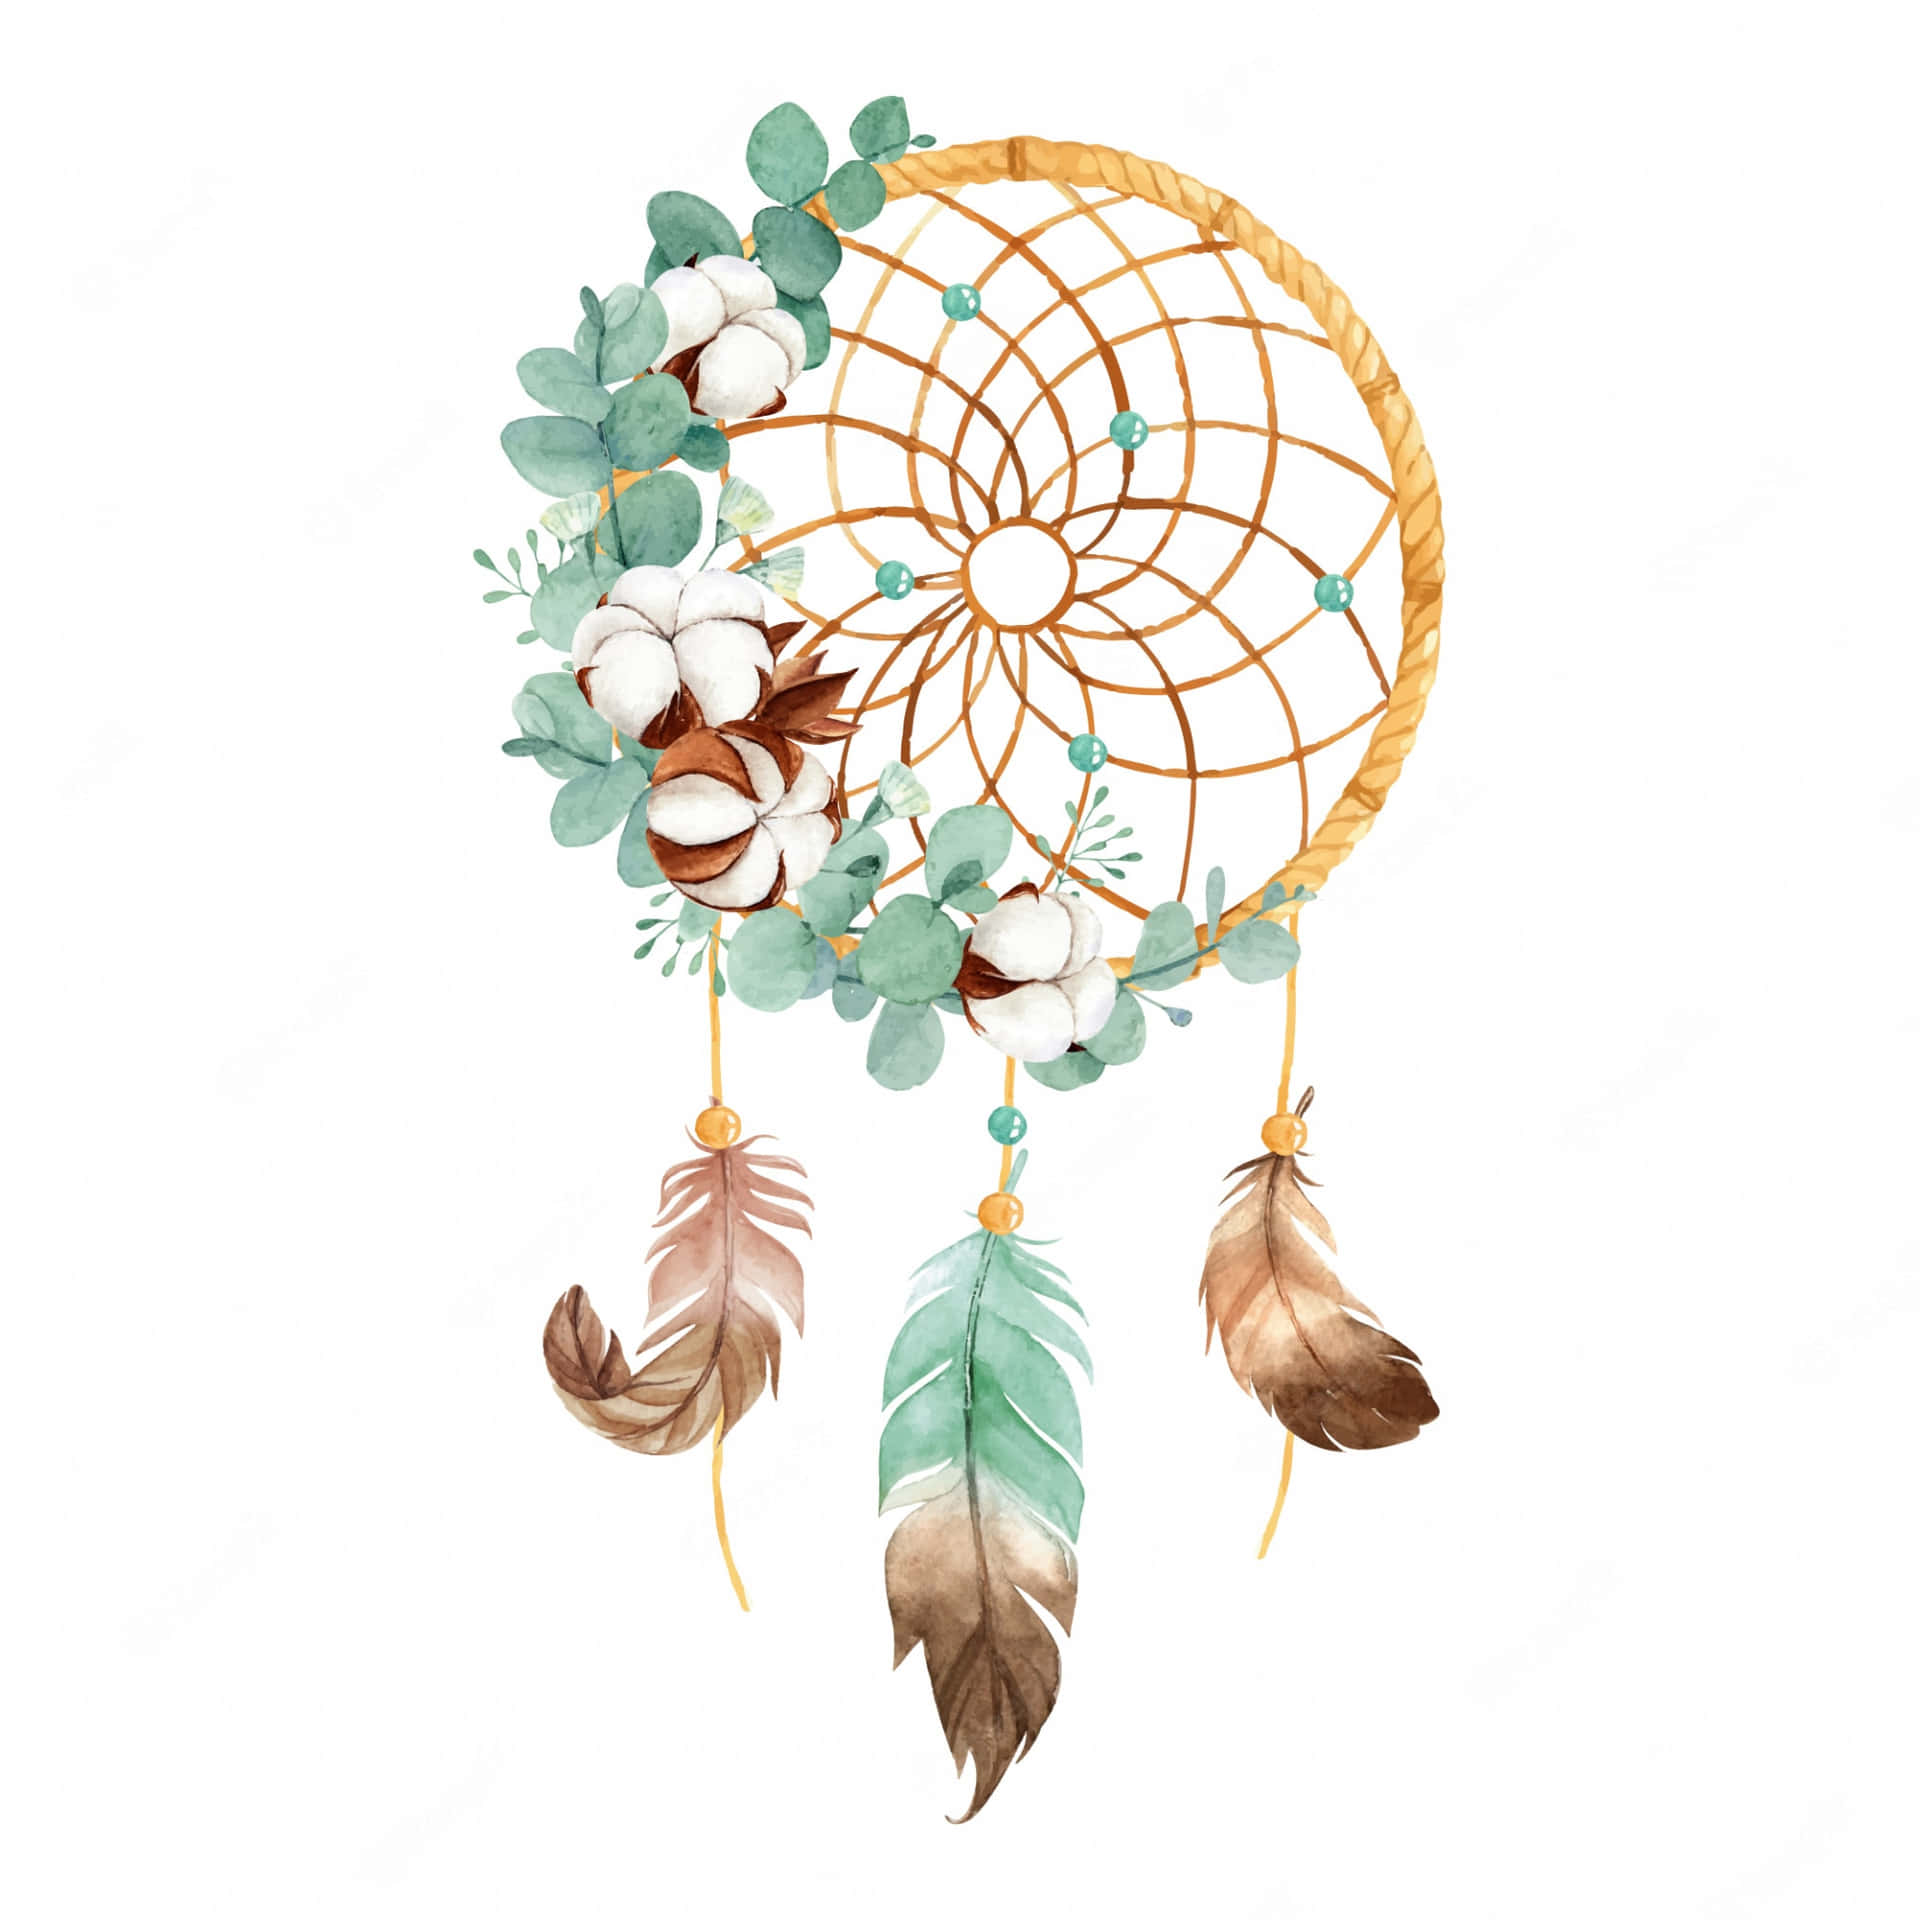 Grateful to Have Dream Catcher by Your Side